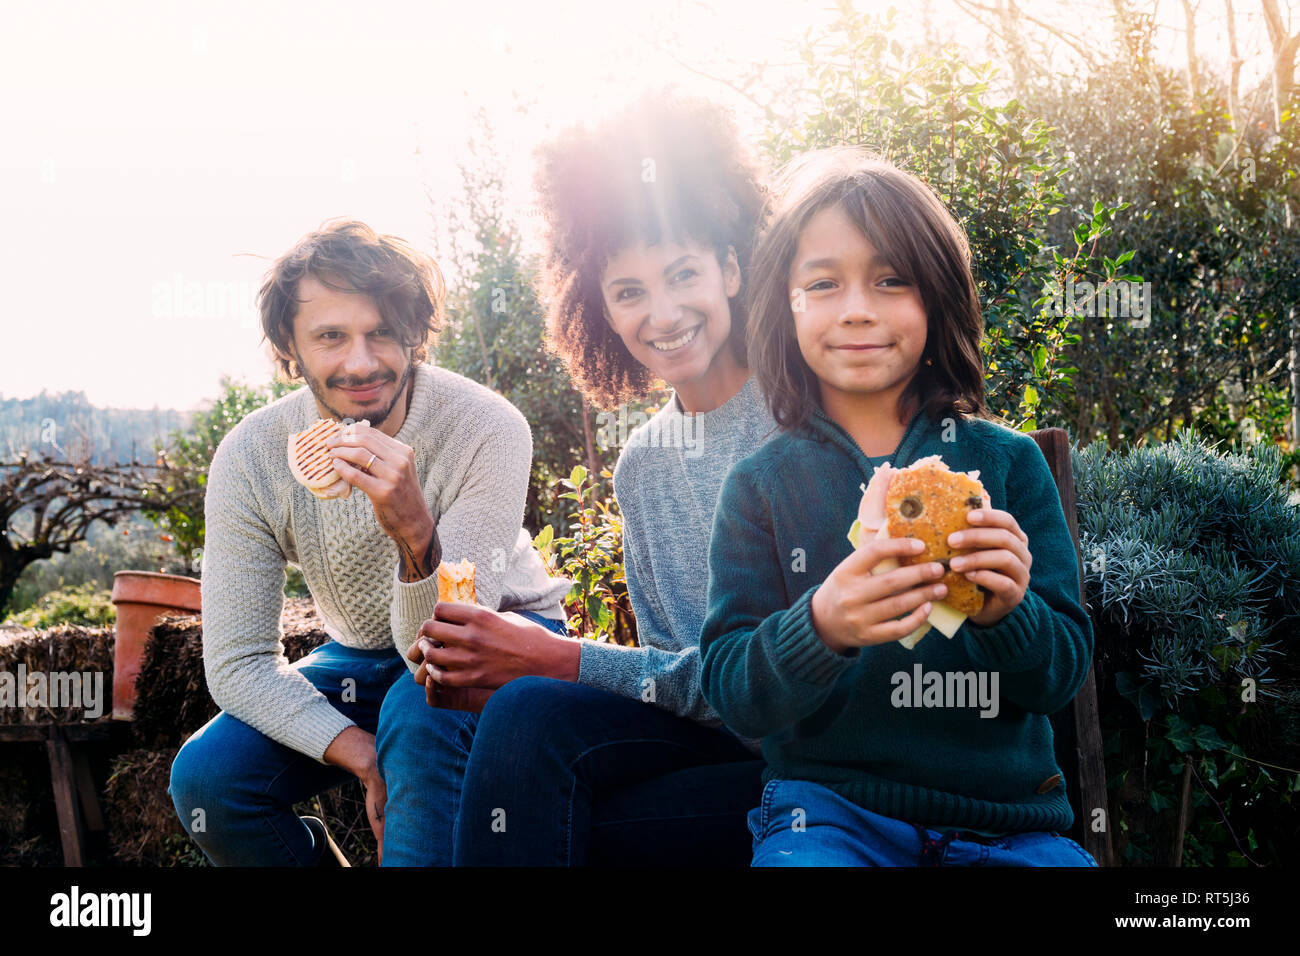 Happy family siting in garden, taking a break, eating sandwiches Stock Photo